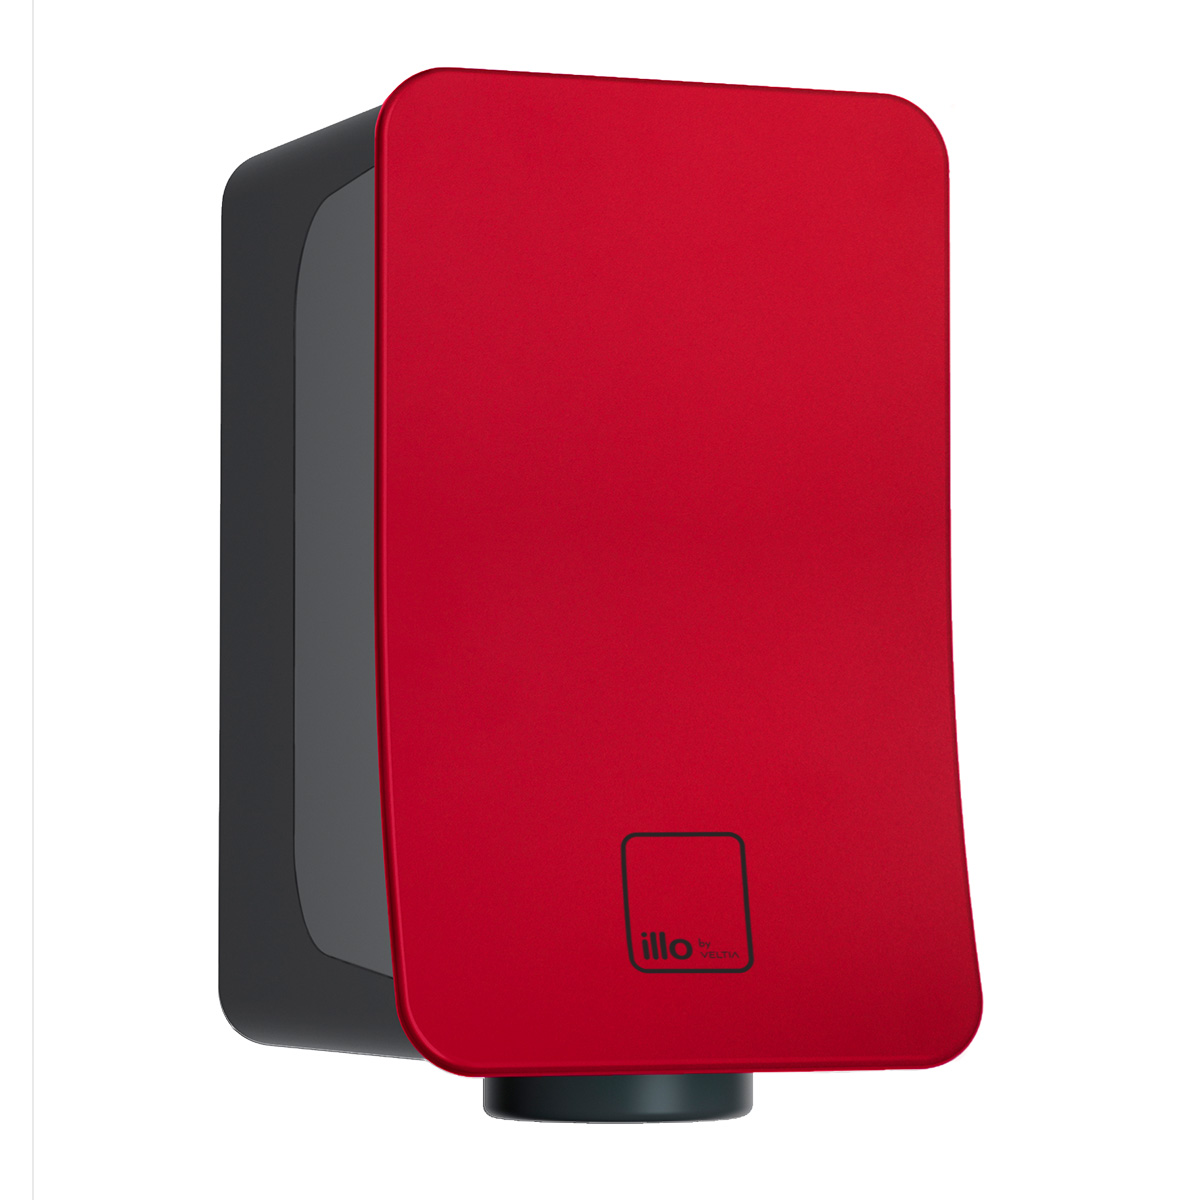 illo by Veltia Hand Dryer - Red Bordeaux - main image